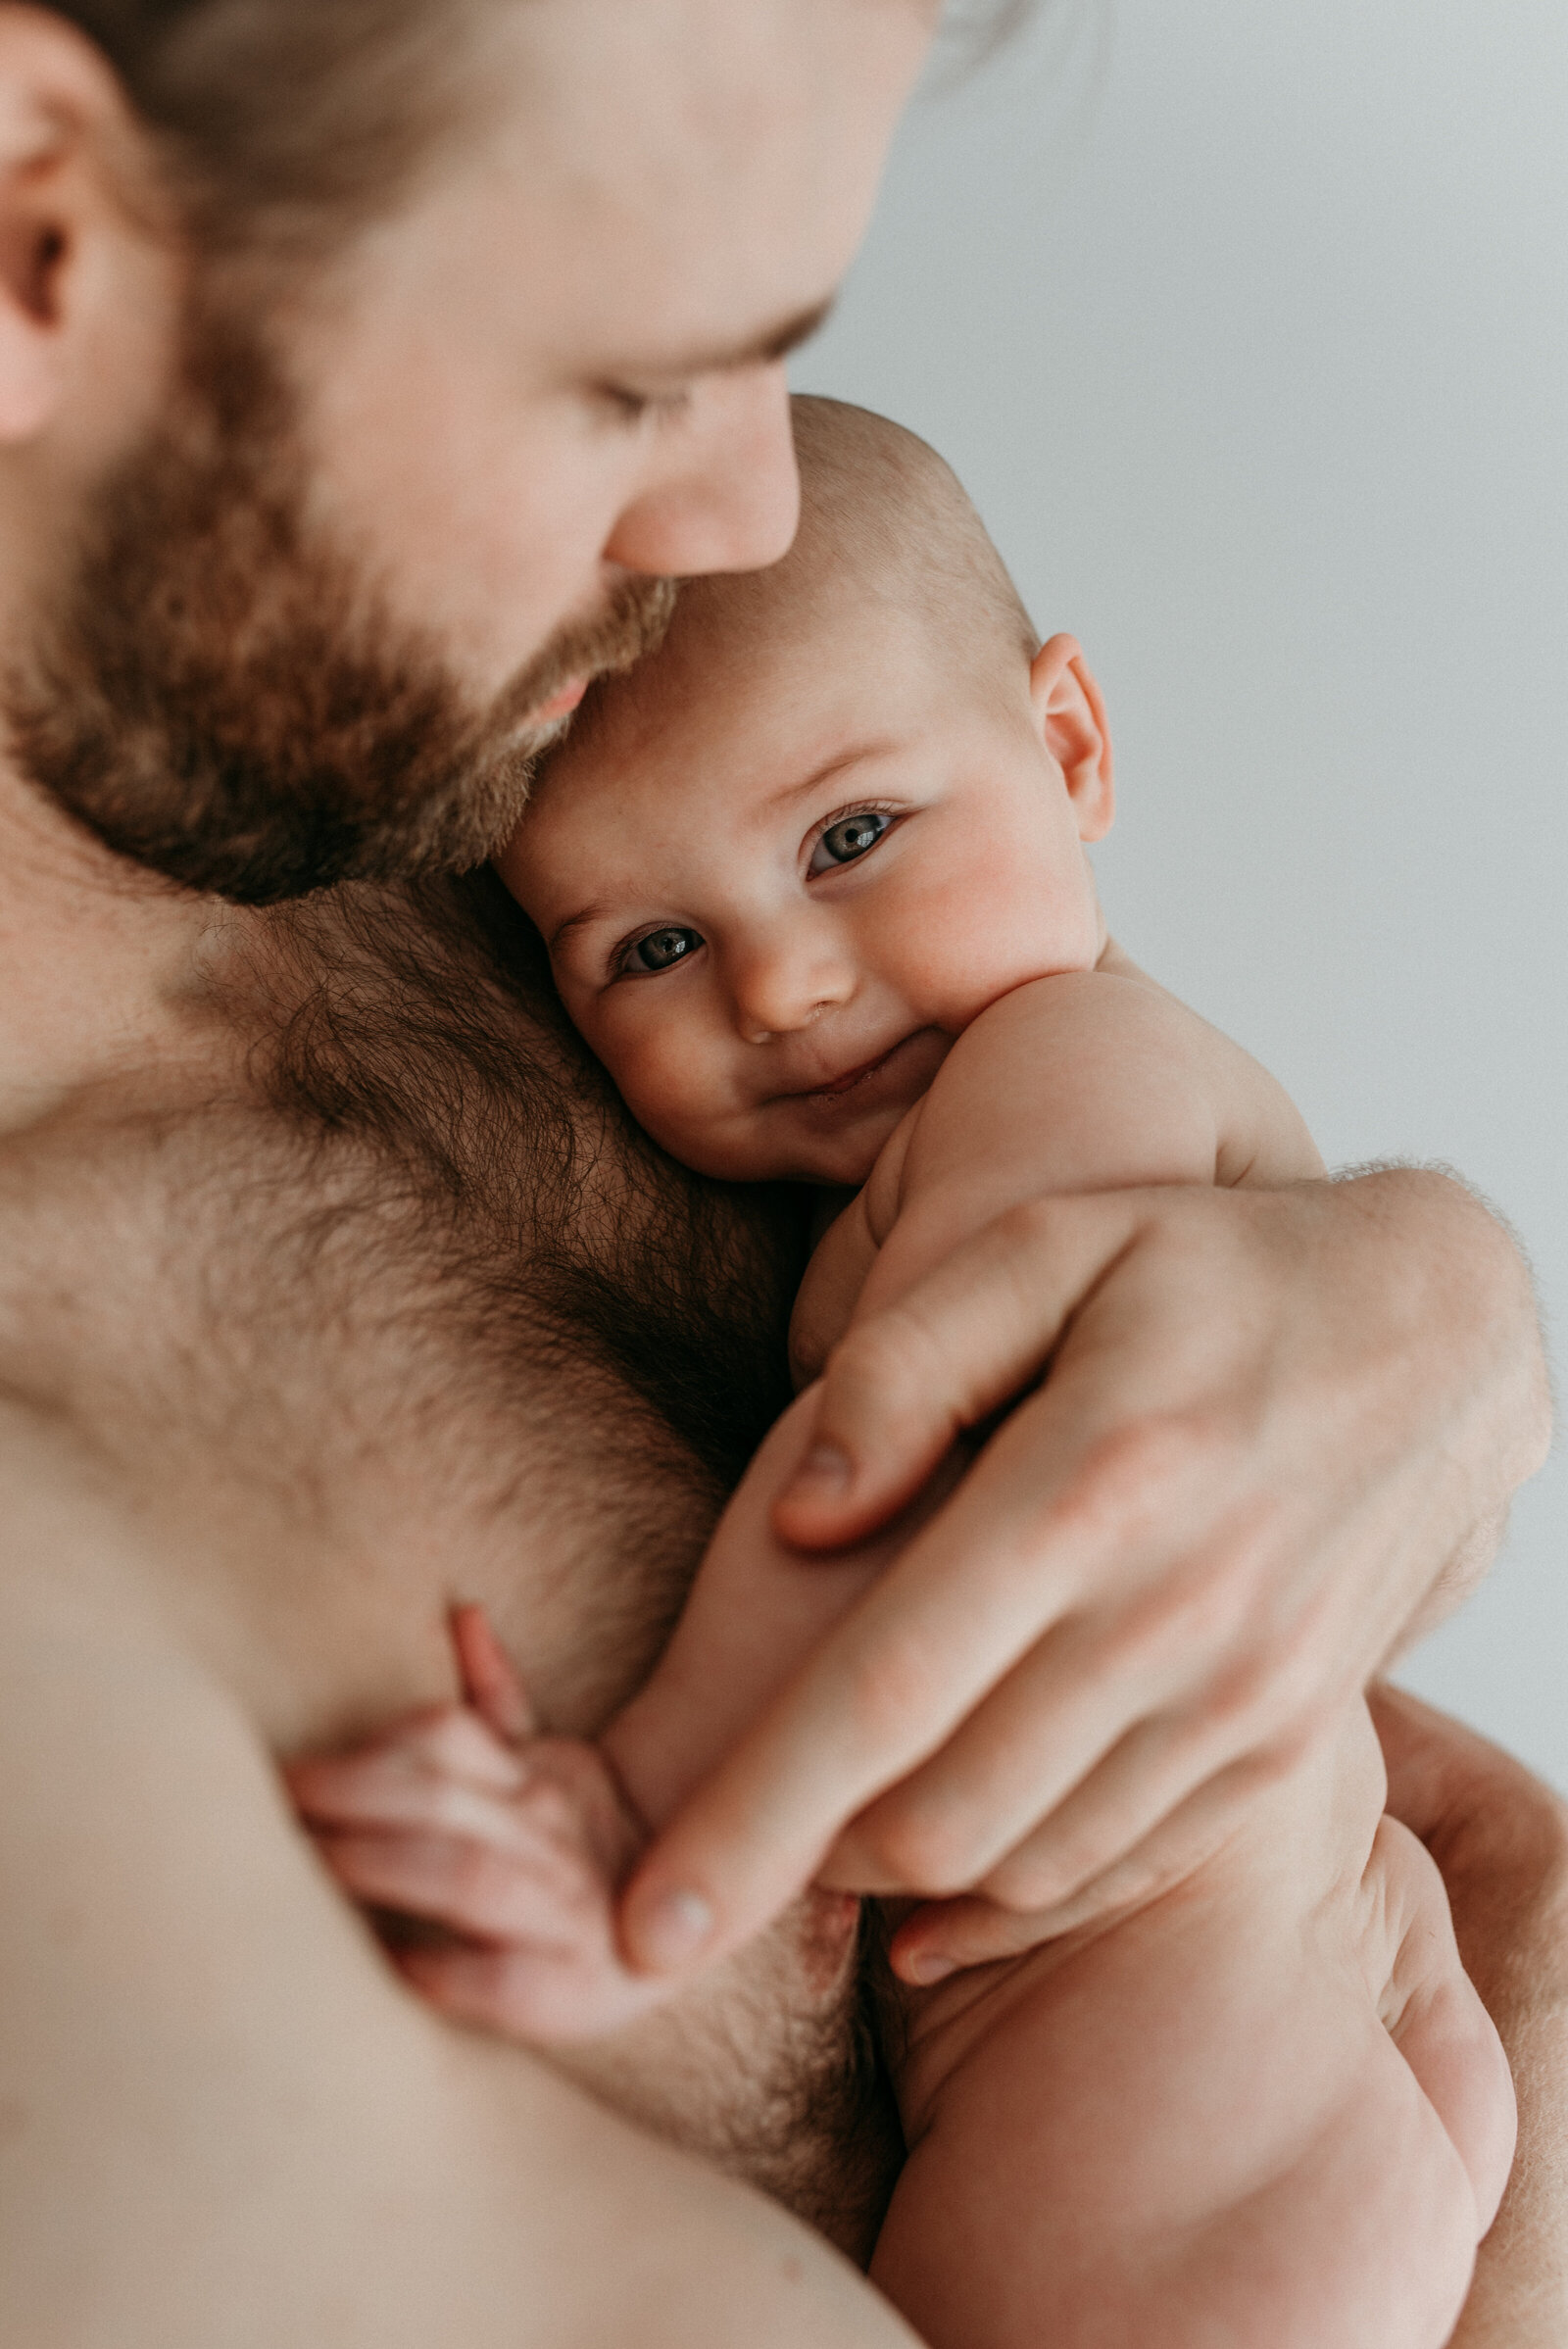 shirtless father holds baby girl while she looks at the camera with a gentle smile and deep eyes